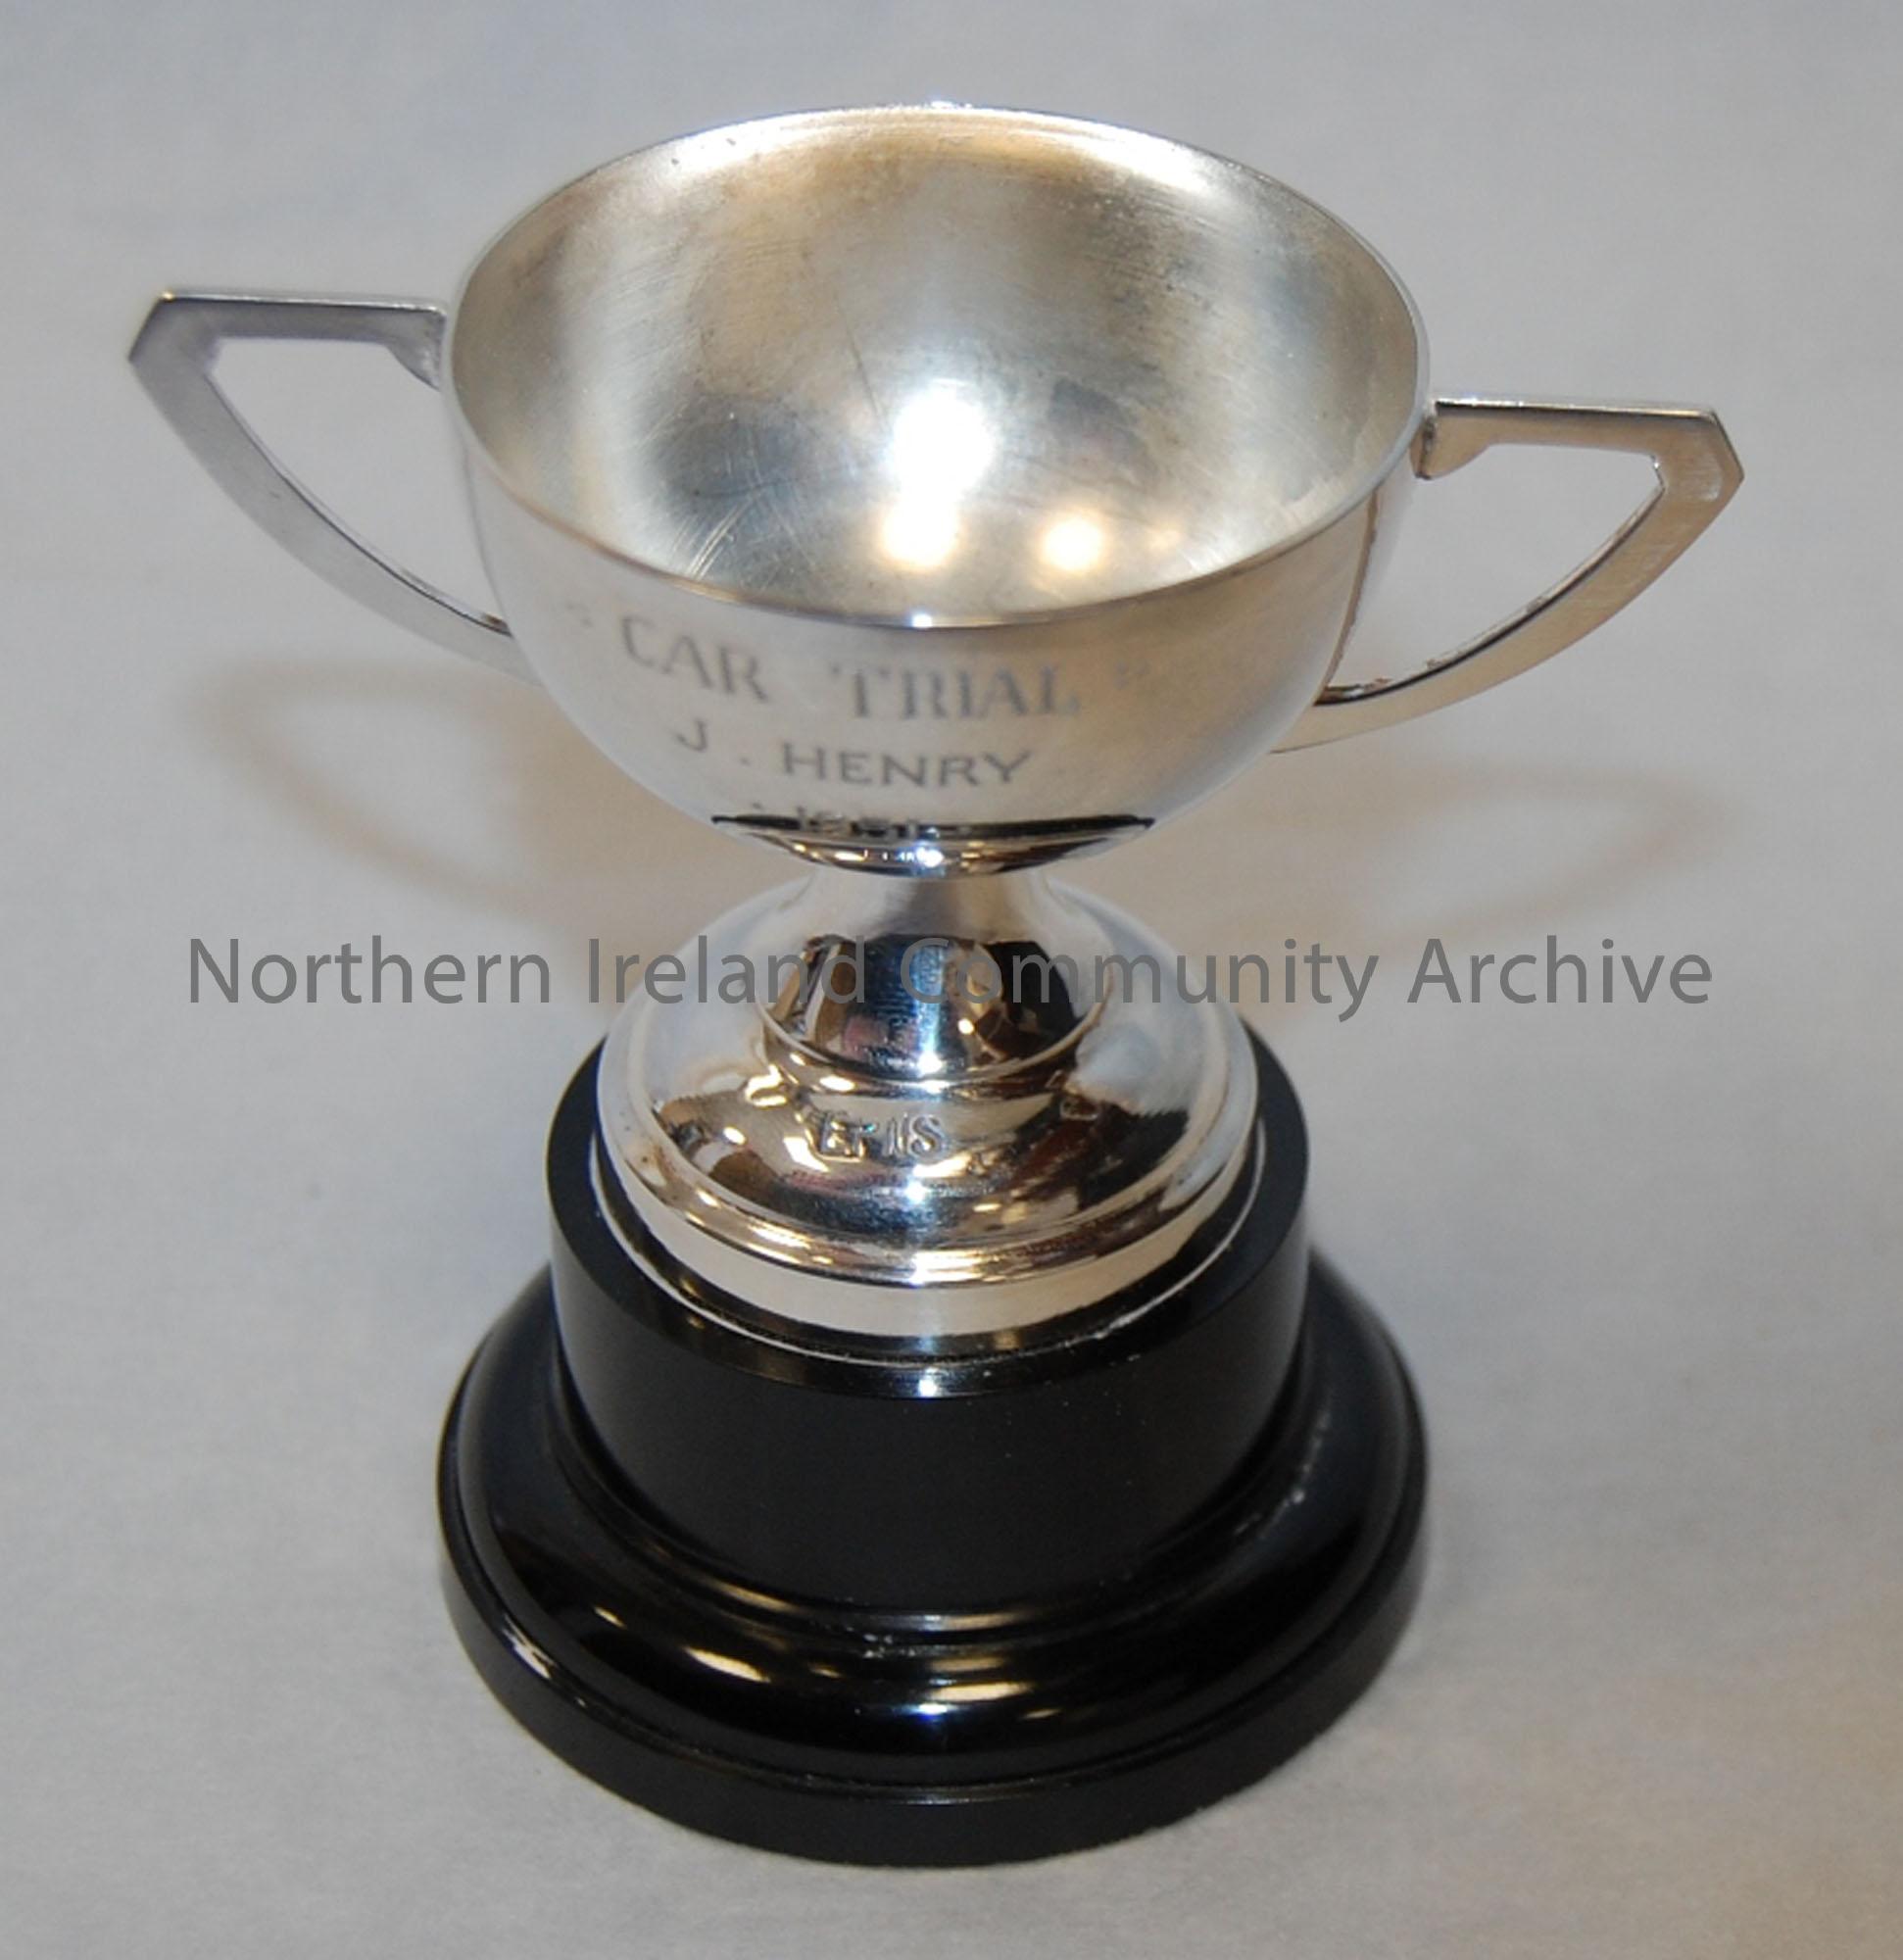 Silver Cup with plastic base and handles. Car Trial J. Henry 1951.